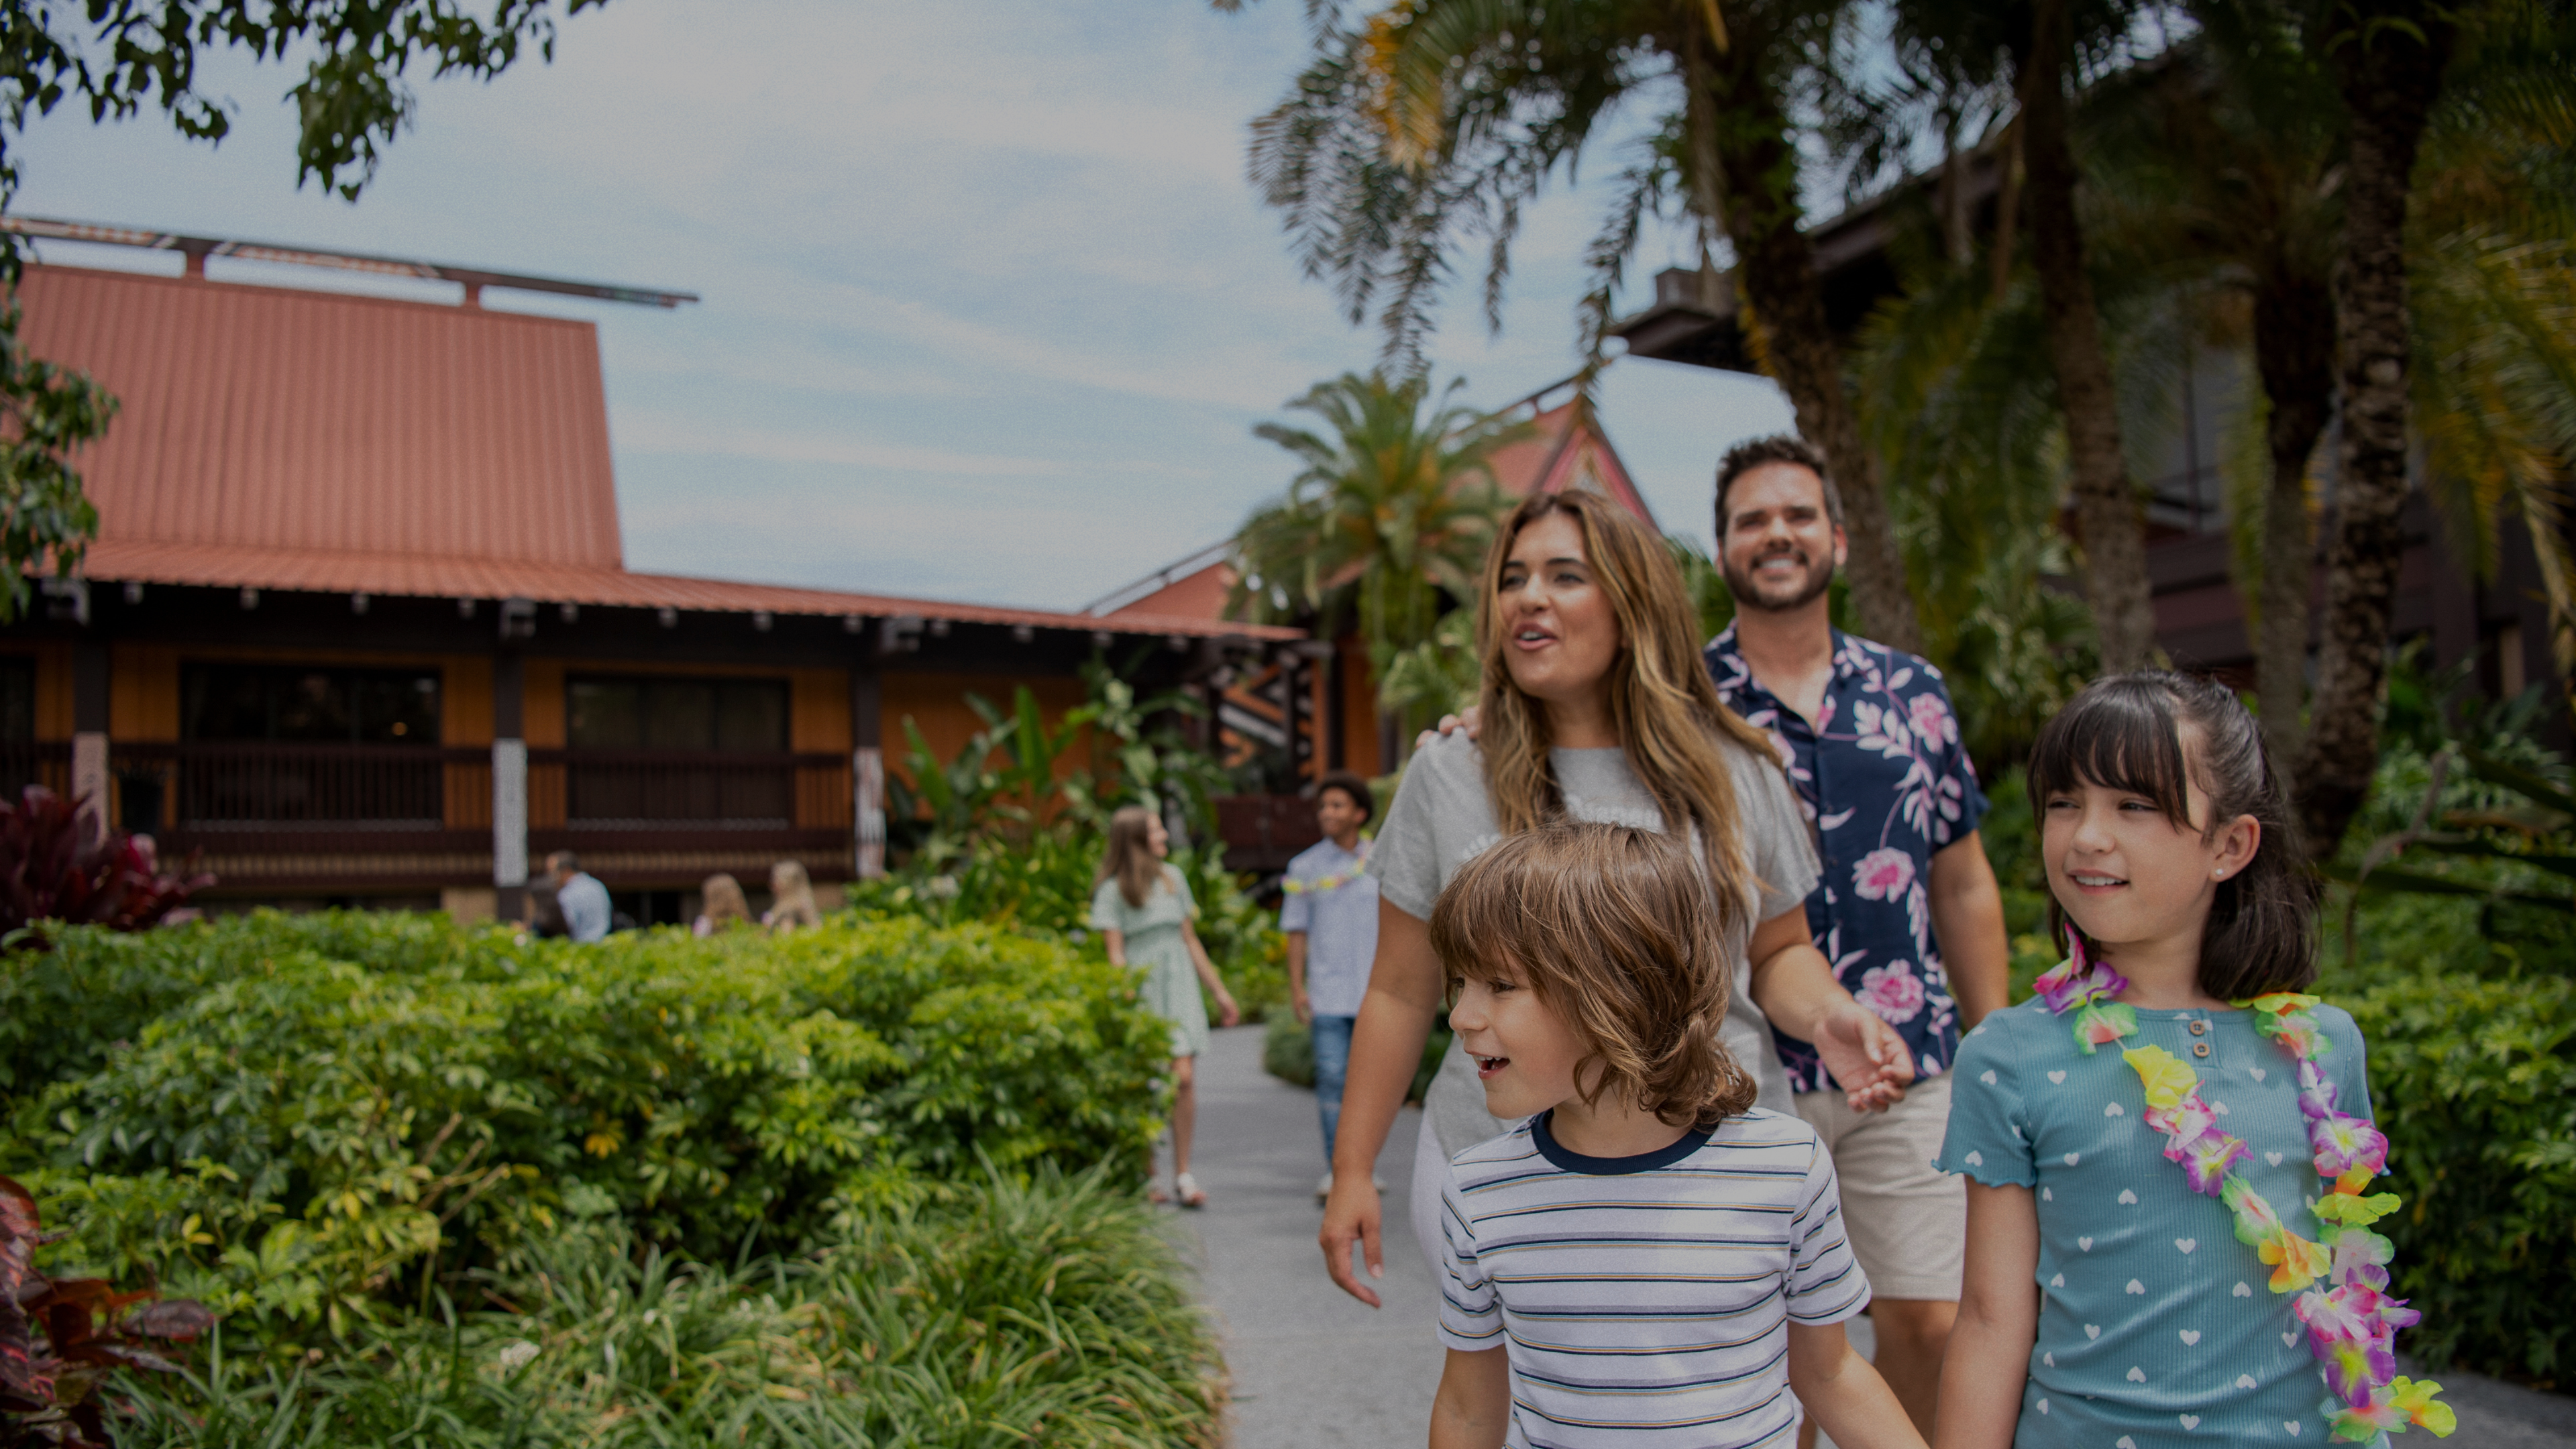 An image of a happy family enjoying their time at Disney World's Polynesian Resort. The family is seen smiling and relaxing in a lush tropical setting, surrounded by palm trees and beautiful landscaping. They are wearing casual vacation attire and appear to be enjoying the resort's amenities and the magical atmosphere of the Disney experience.